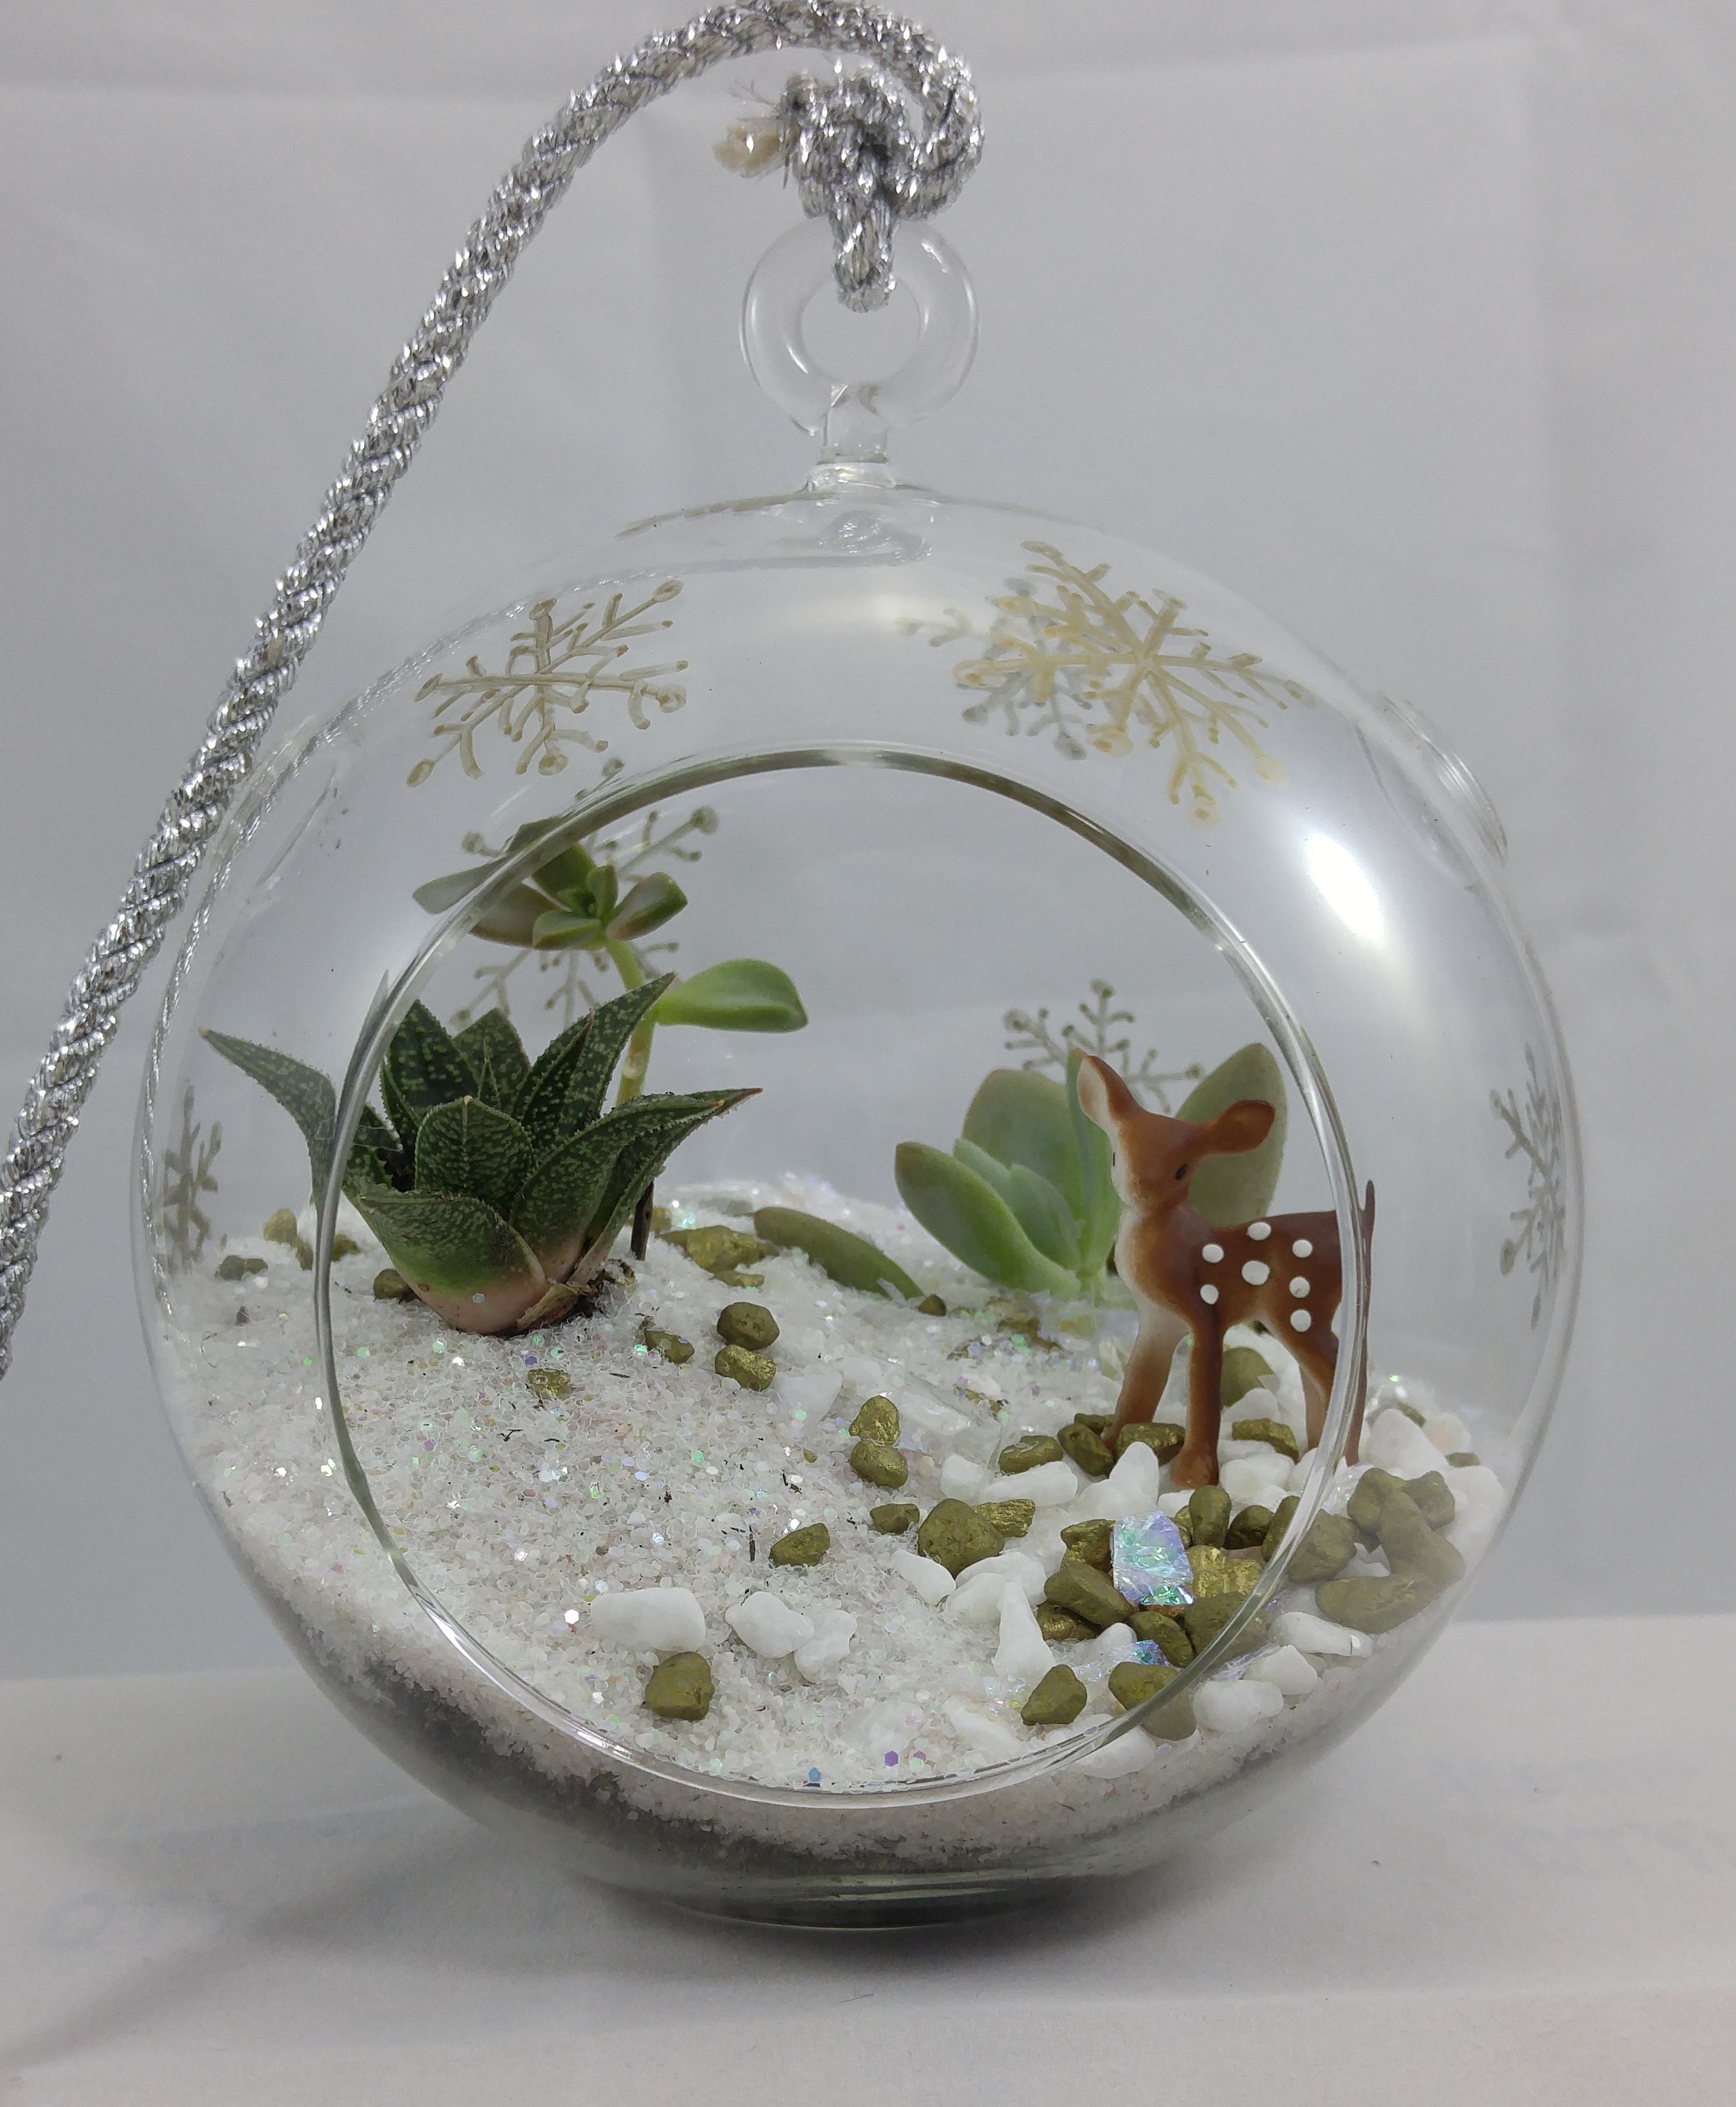 A Succulents in Snow Globe plant nite project by Yaymaker